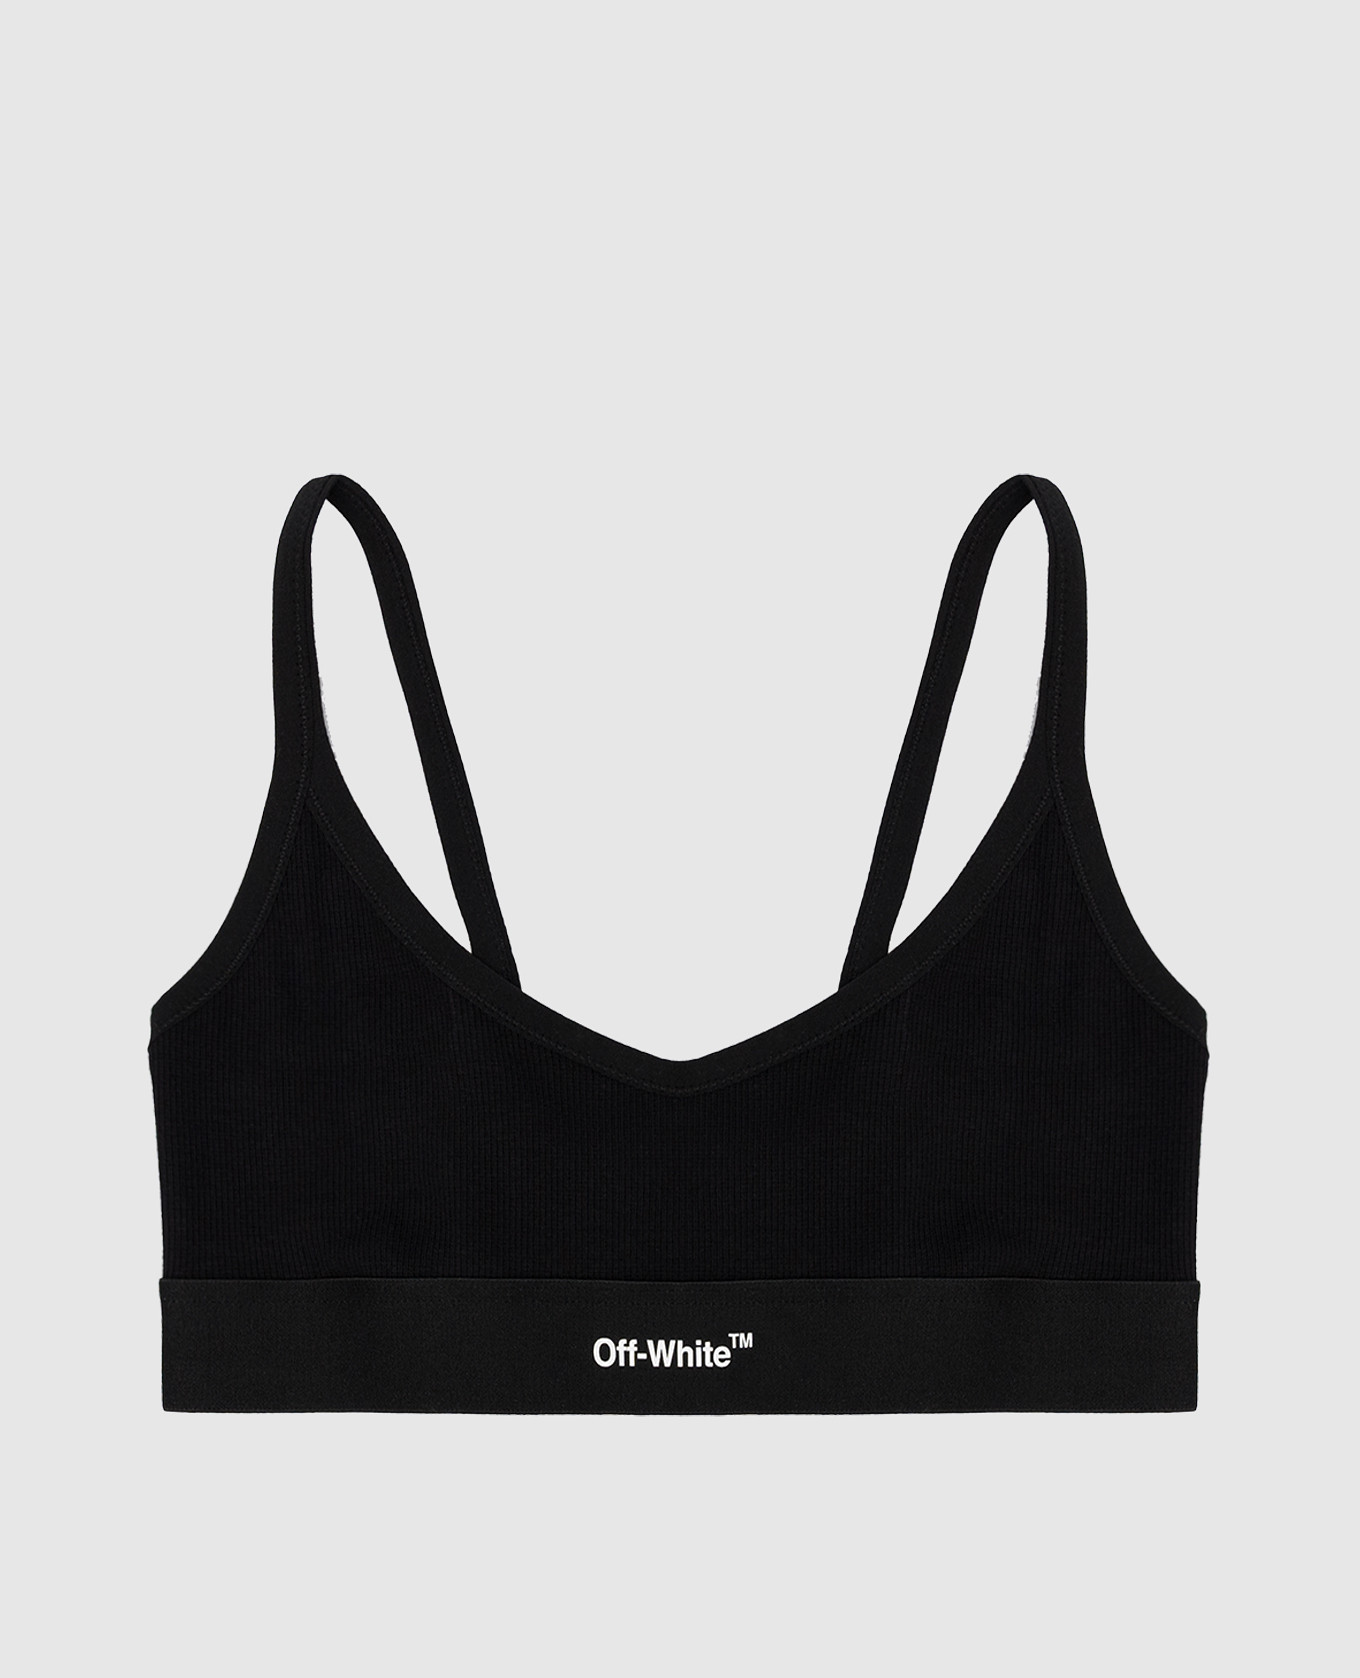 Black top with contrasting logo